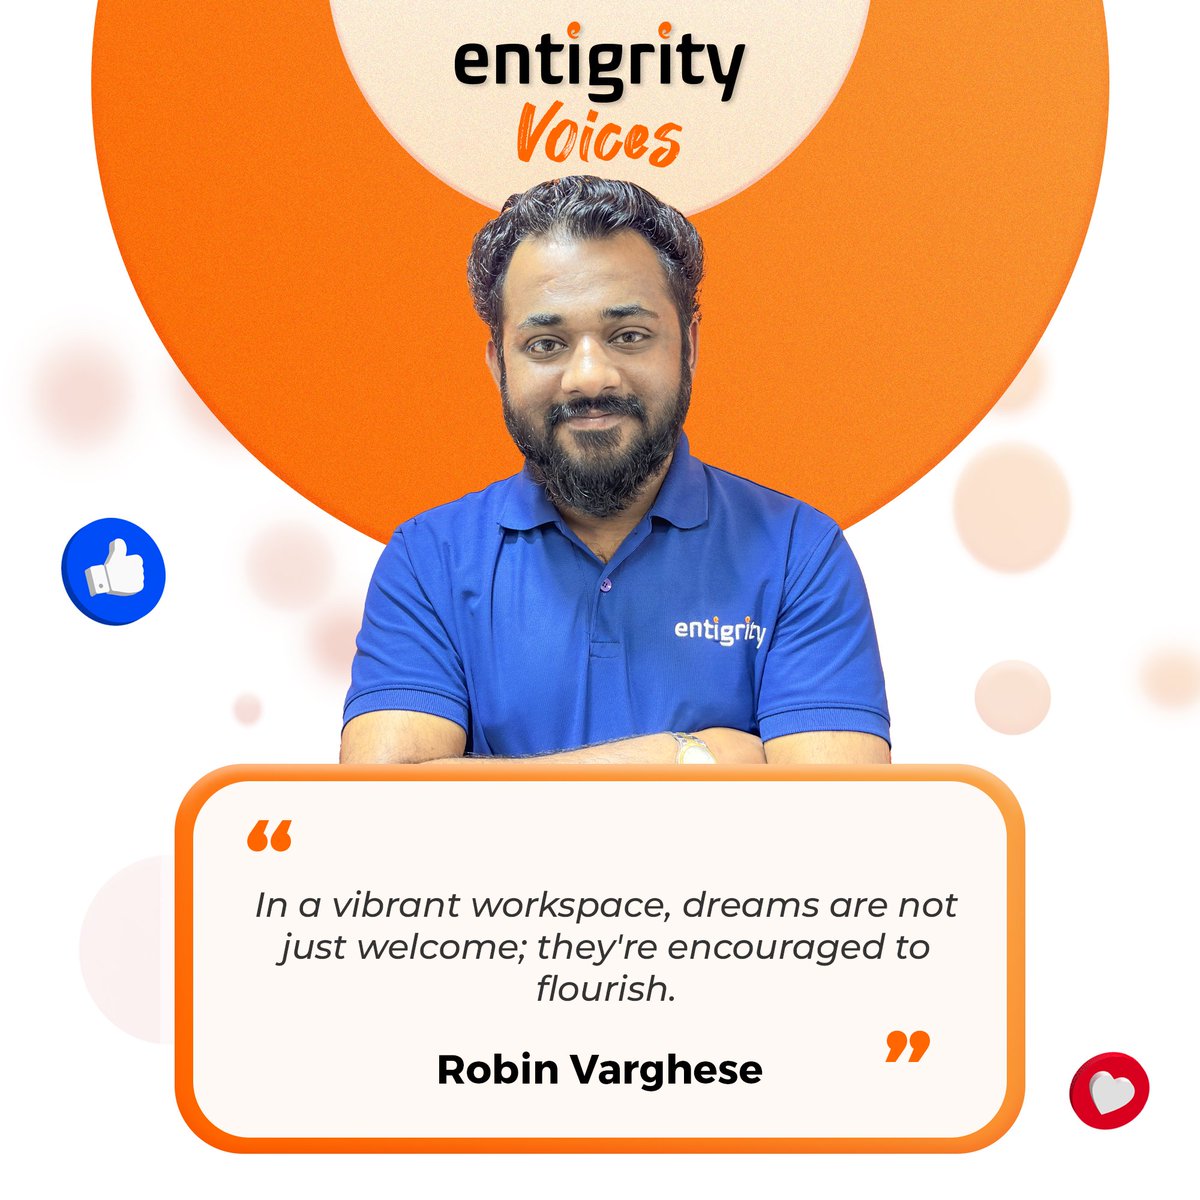 We come carrying a dream at Entigrity and find a way to flourish it with encouragement and support. Always cherish the work culture and environment here. #Entigrity #DreamWorkplace #BestPlacetoWork